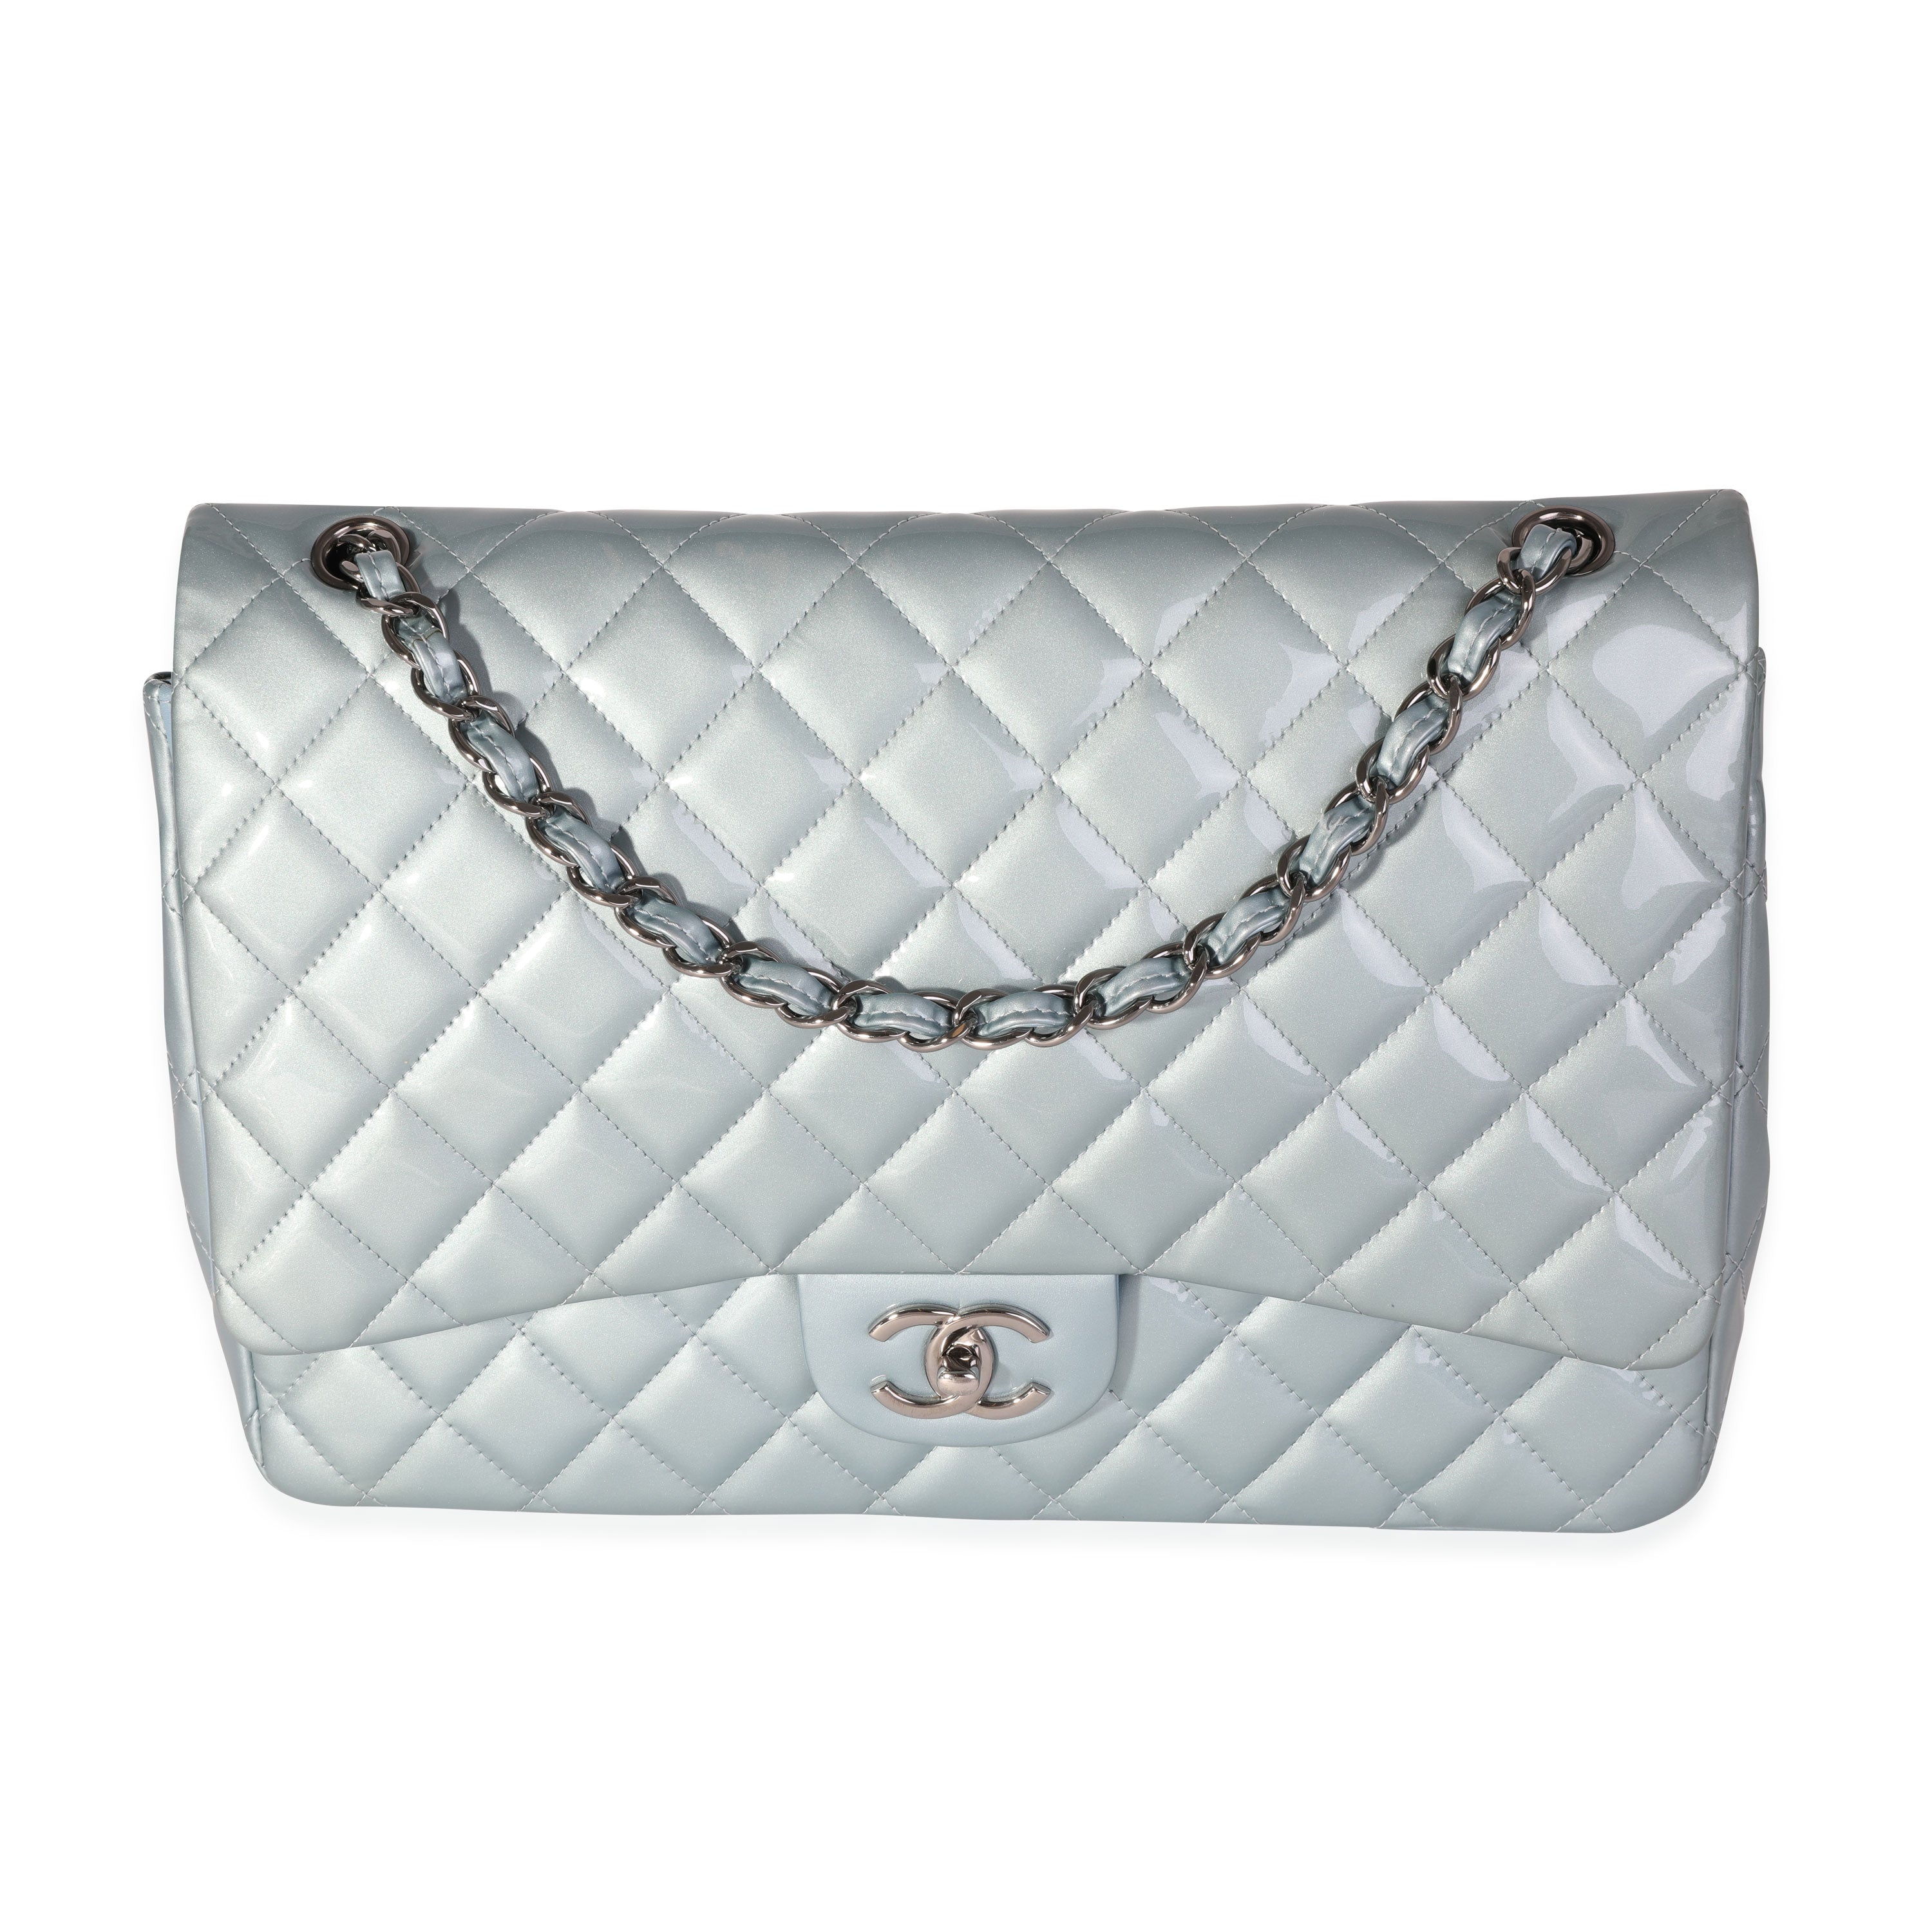 Chanel Light Blue Quilted Patent Leather Maxi Classic Double Flap